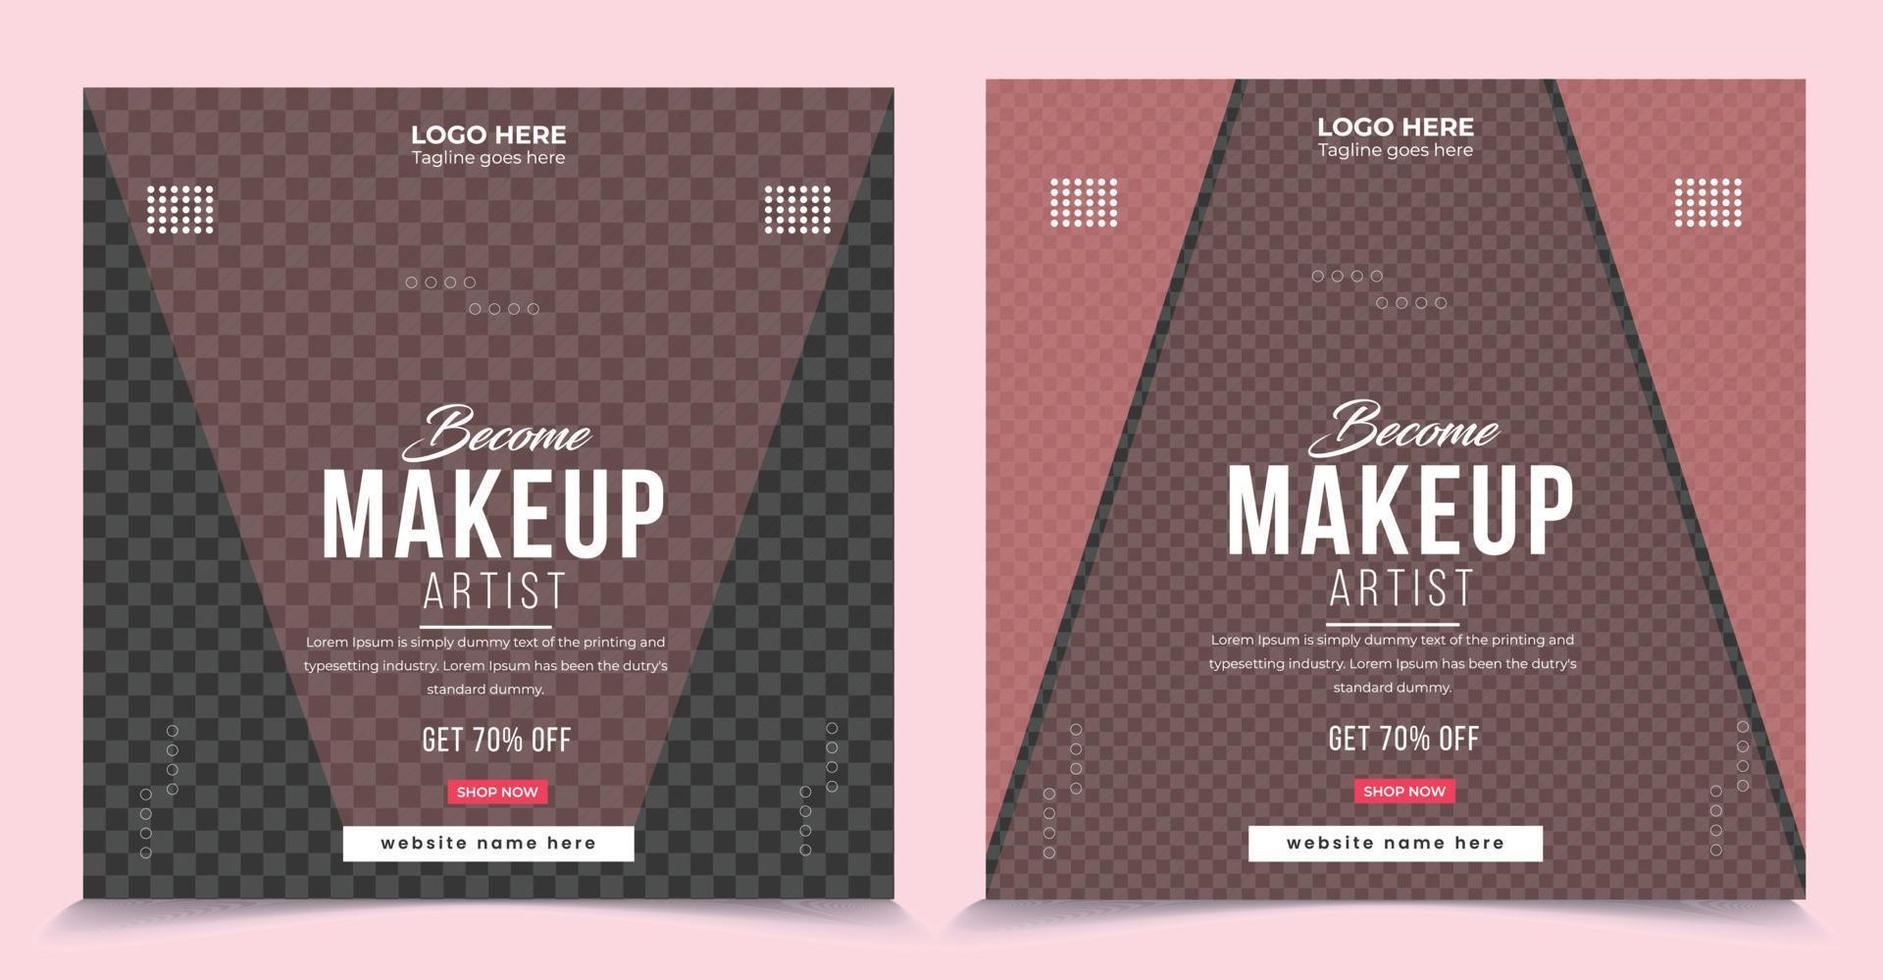 Become a makeup artist promotional square web post banner template for a social media platform vector